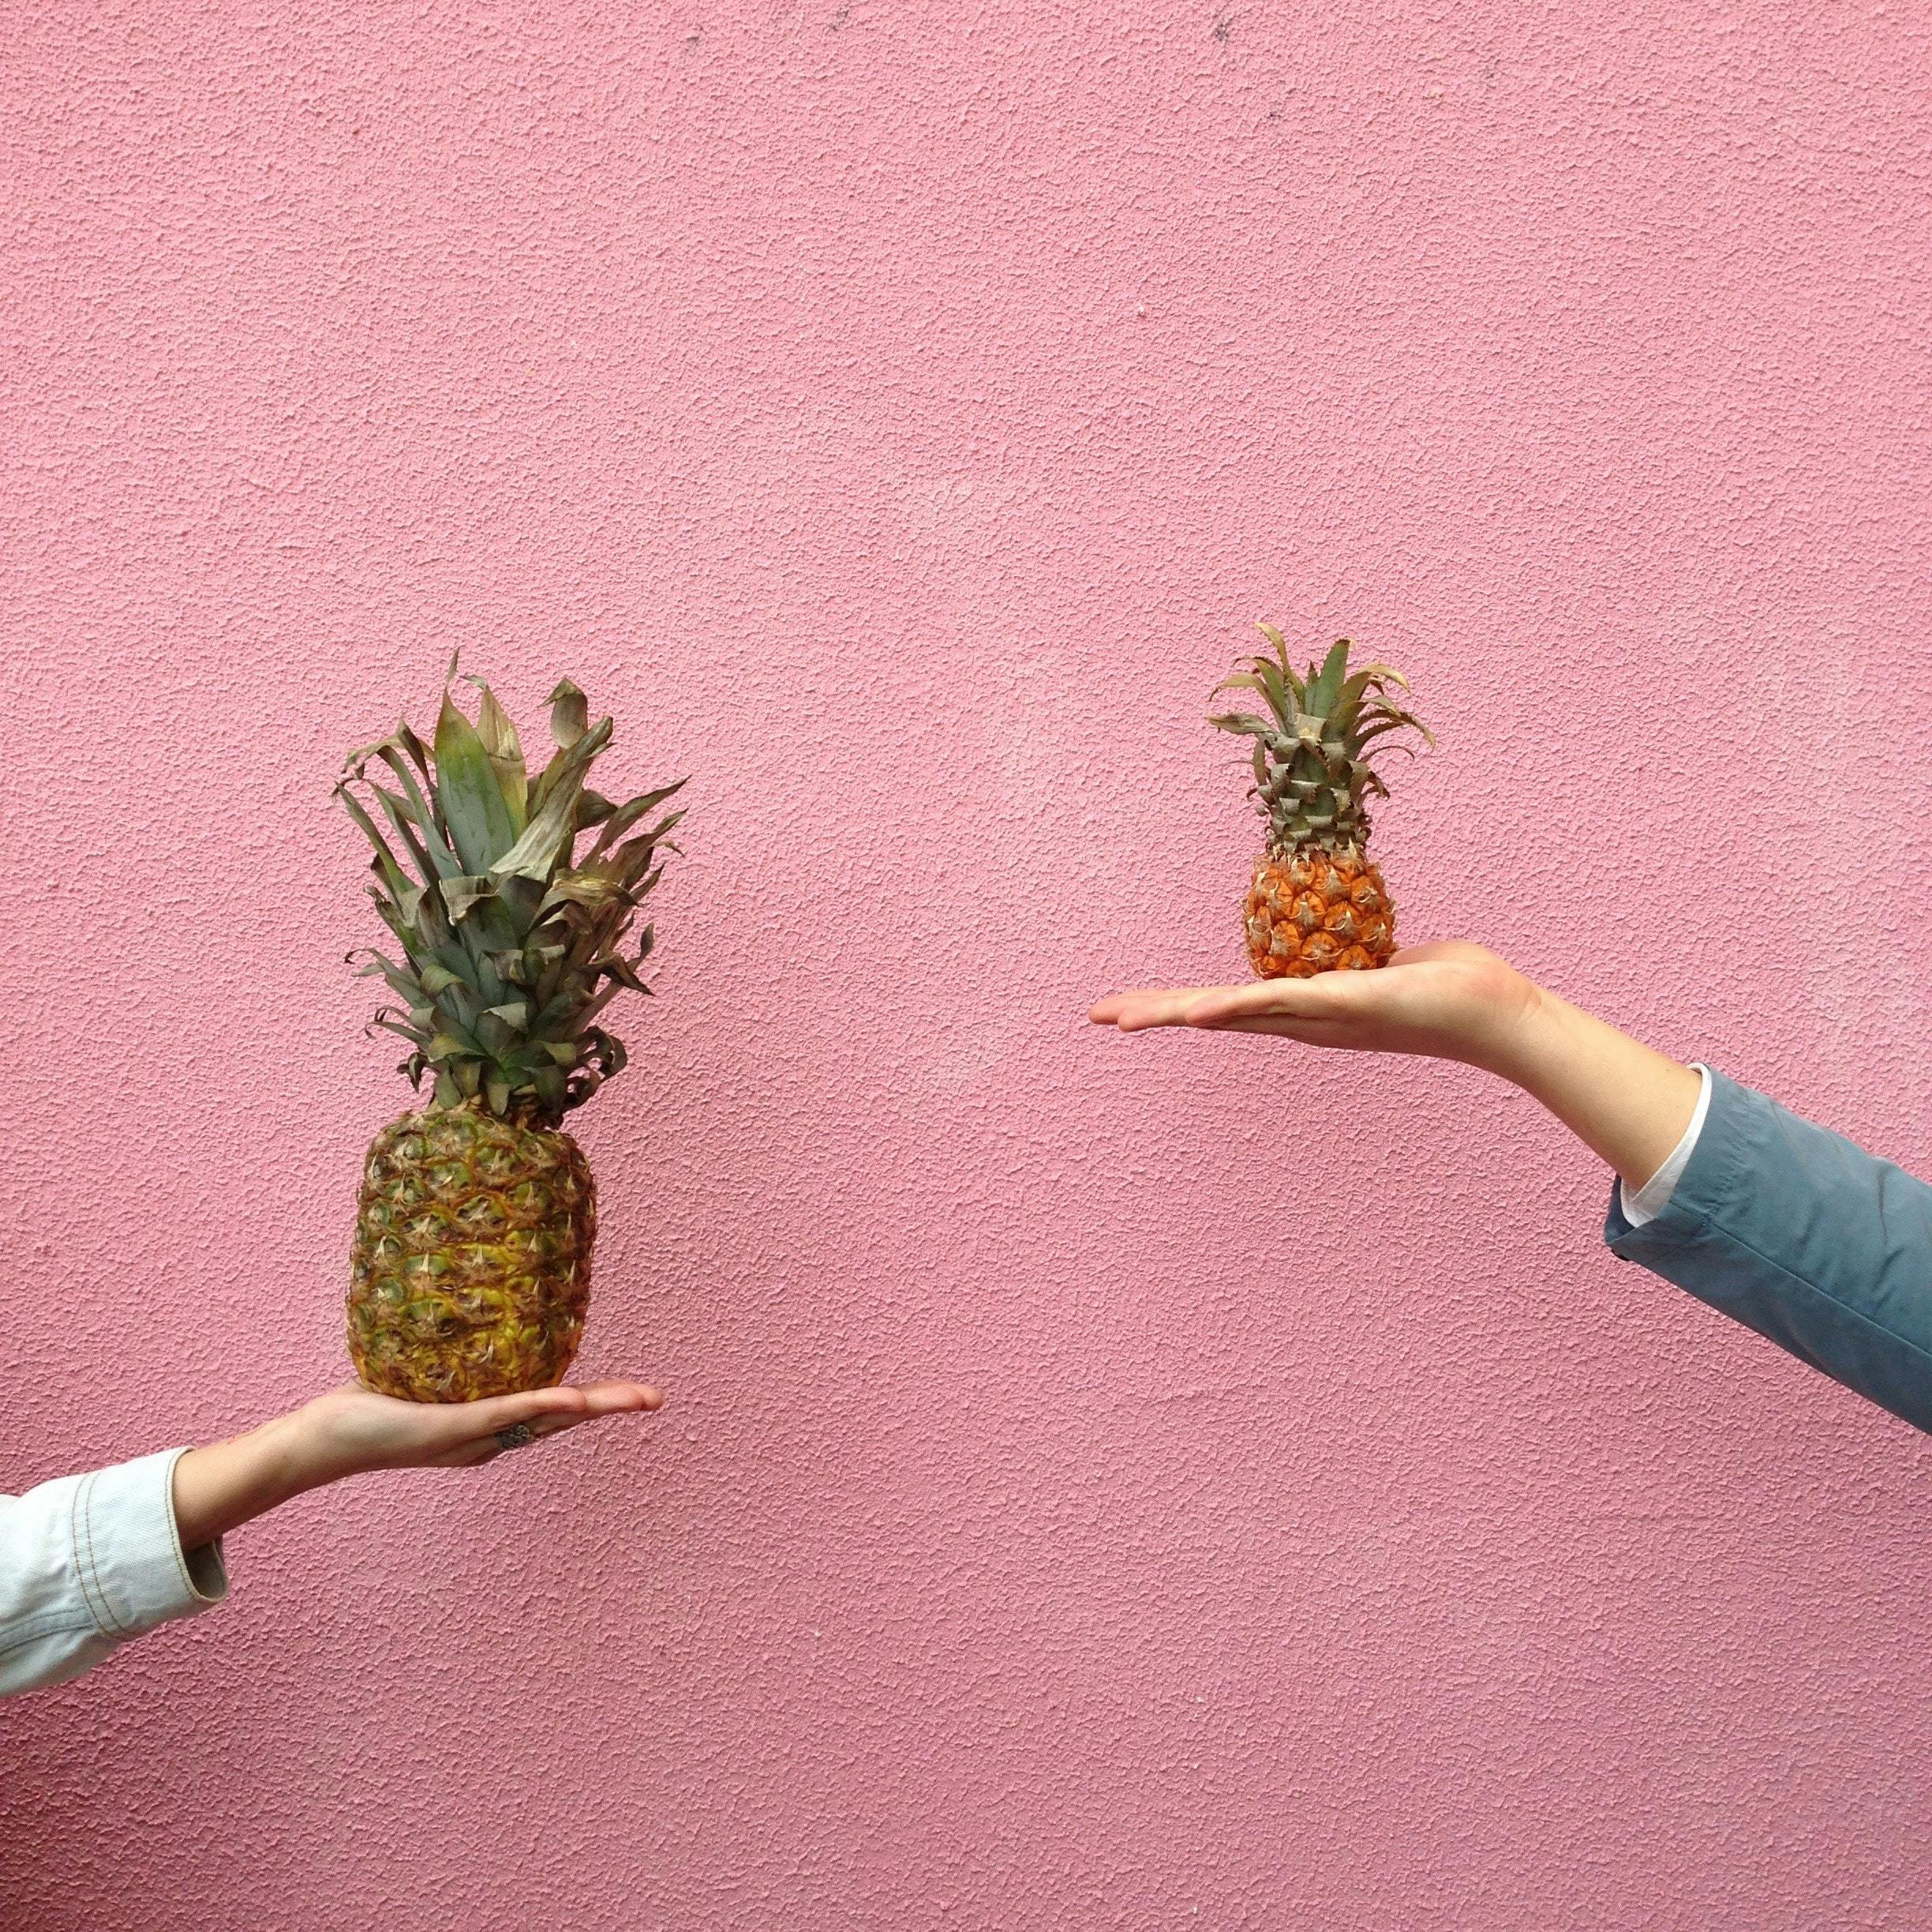 Comparing Pineapples